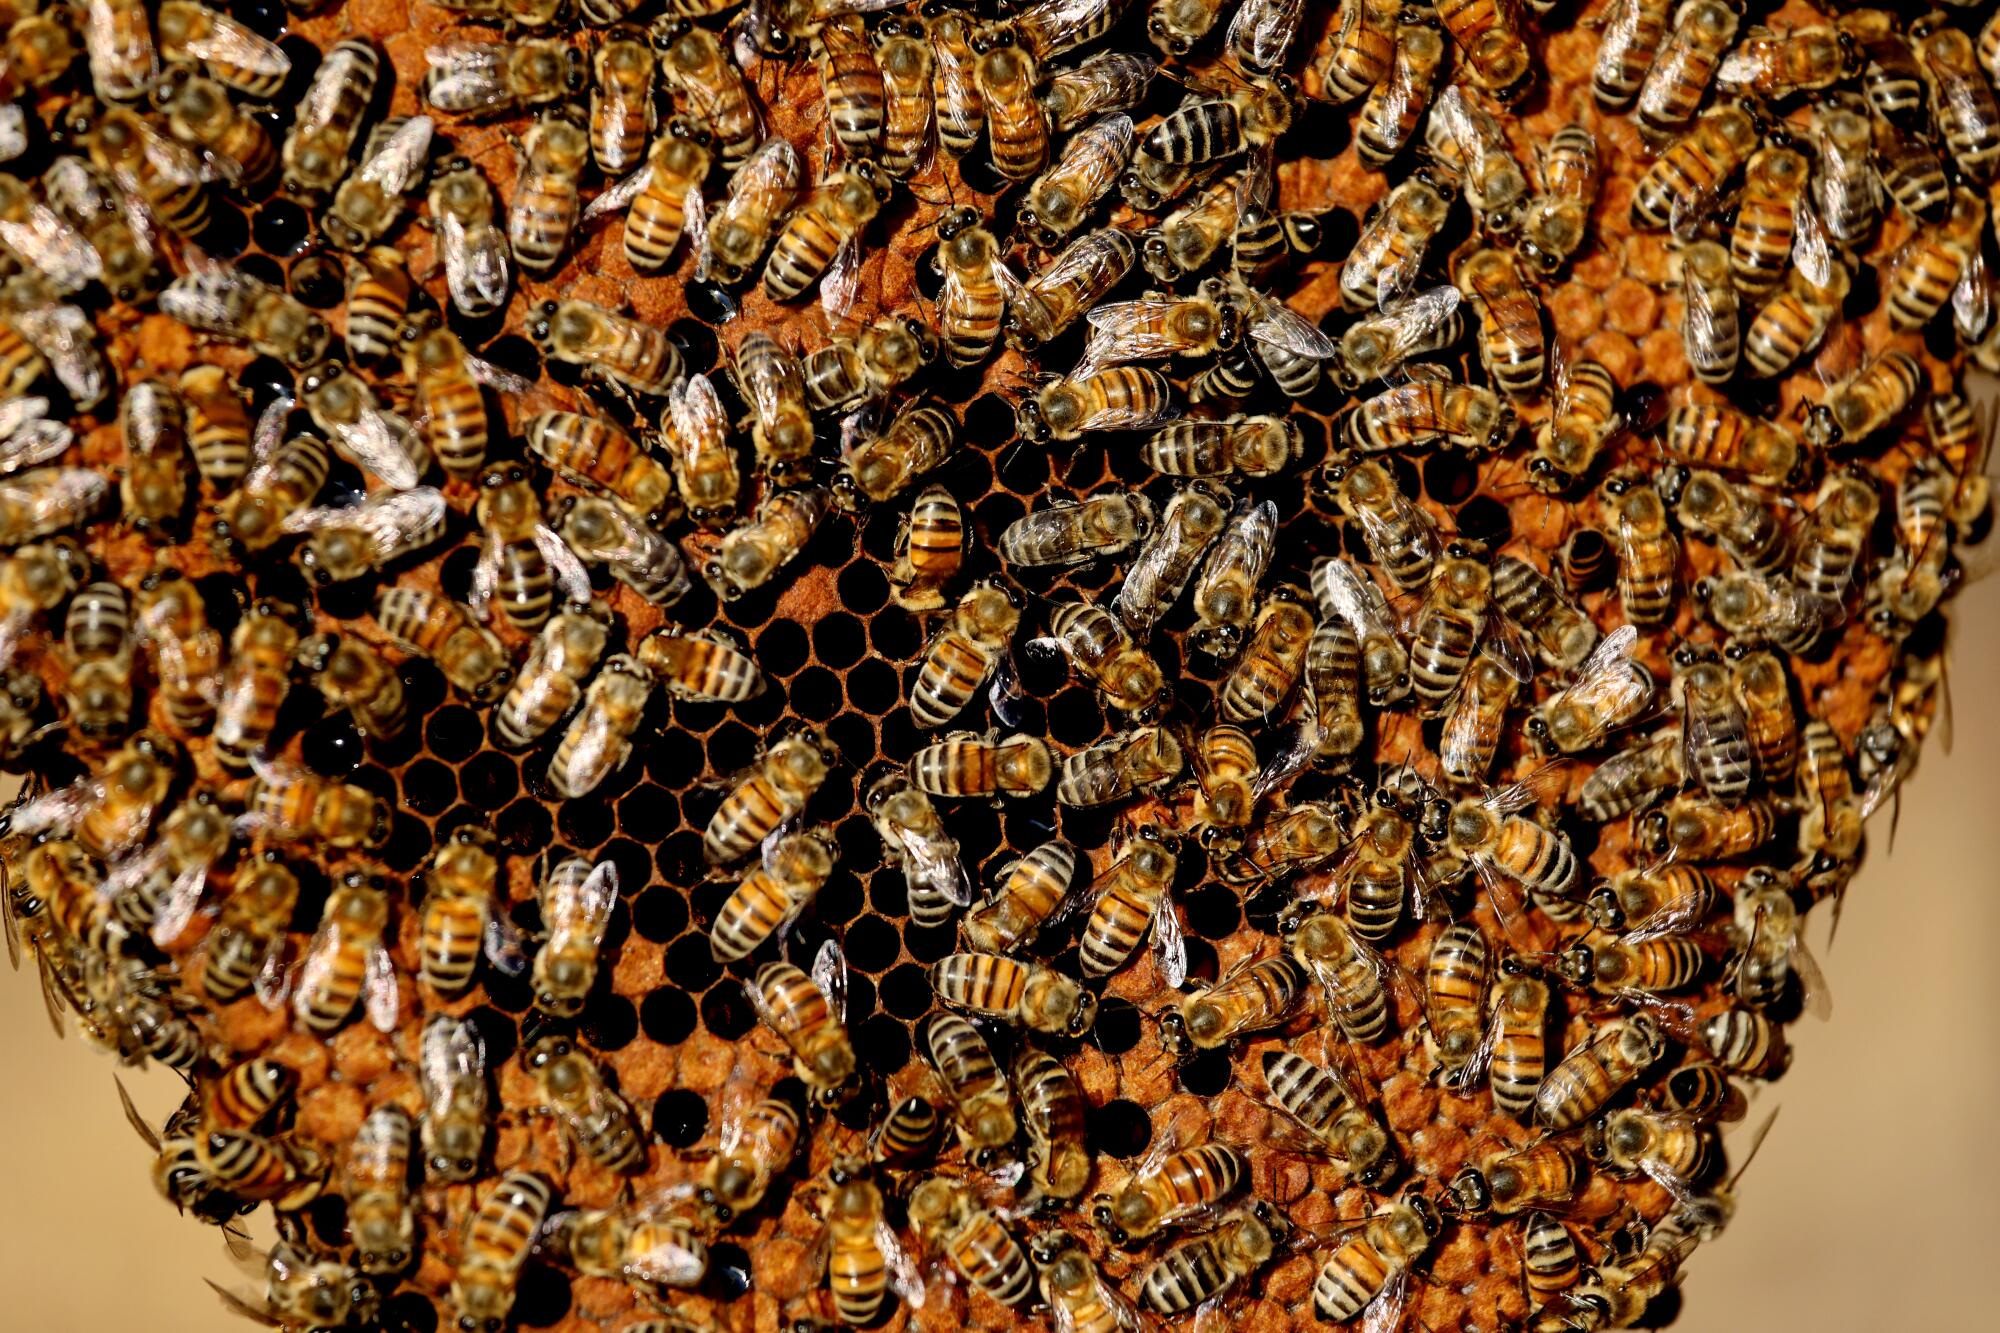 A cluster of bees